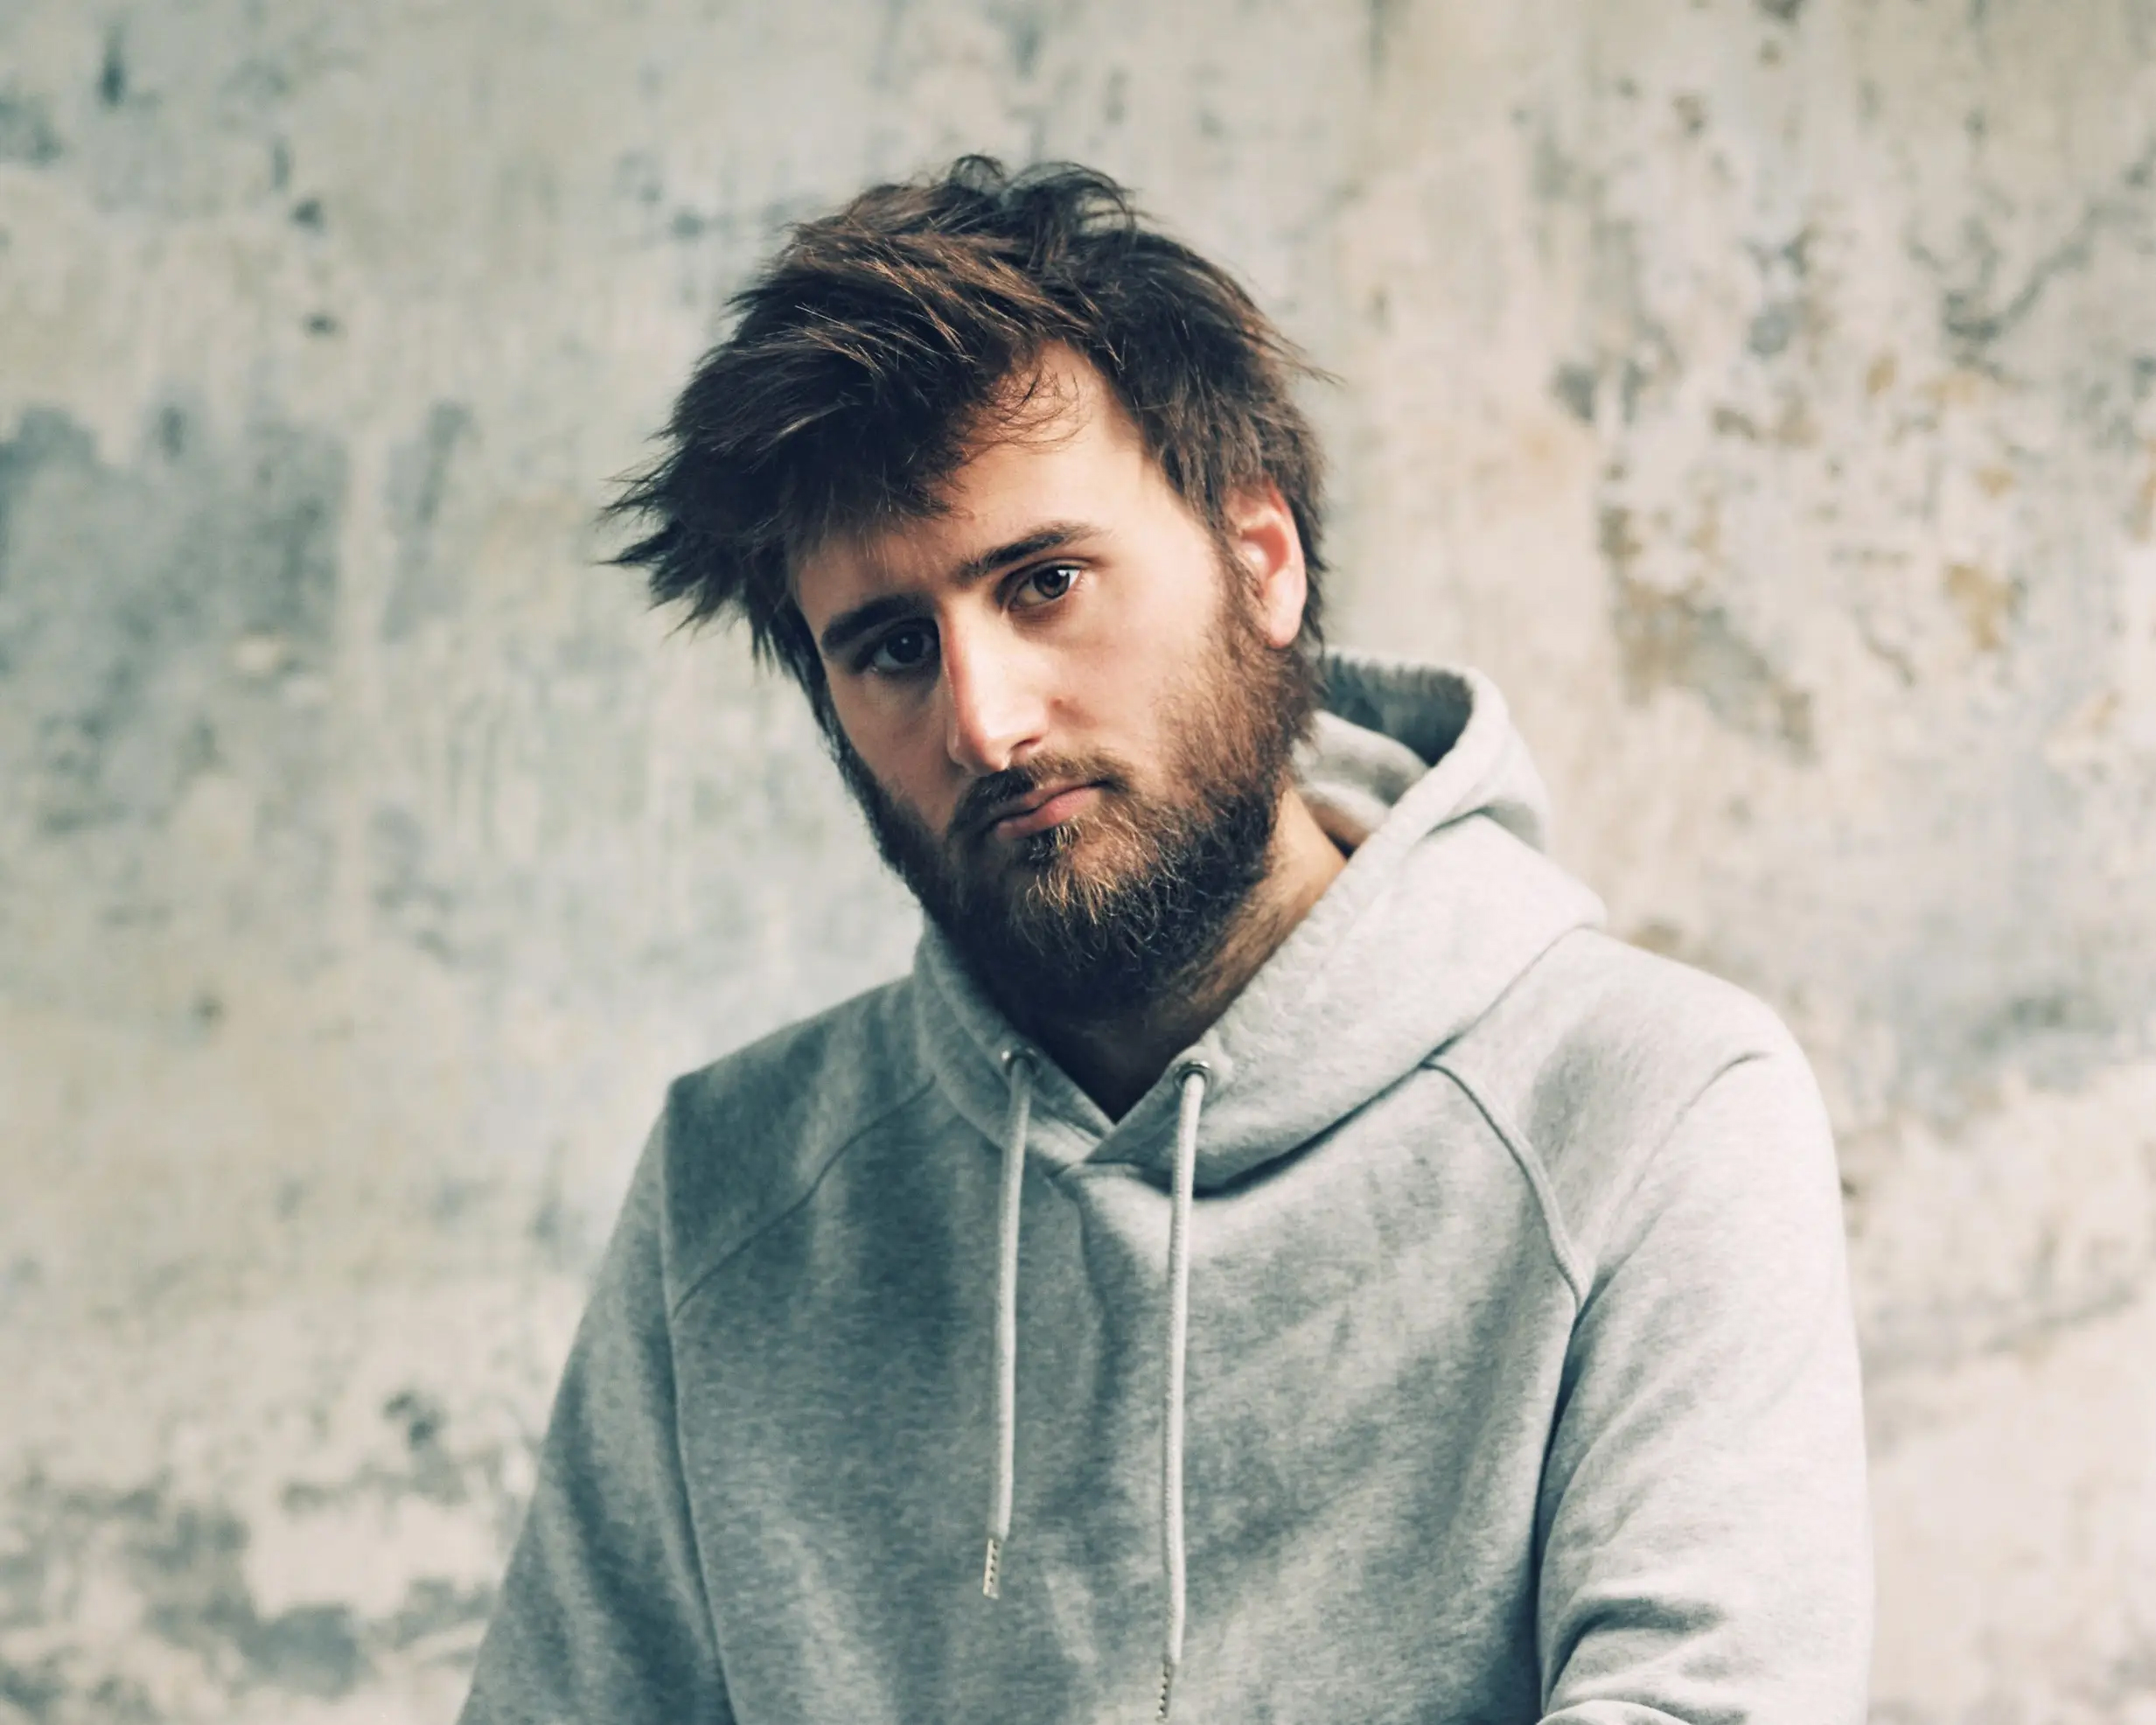 A man with dark hair and a beard, wearing a sweatshirt, looks at the camera